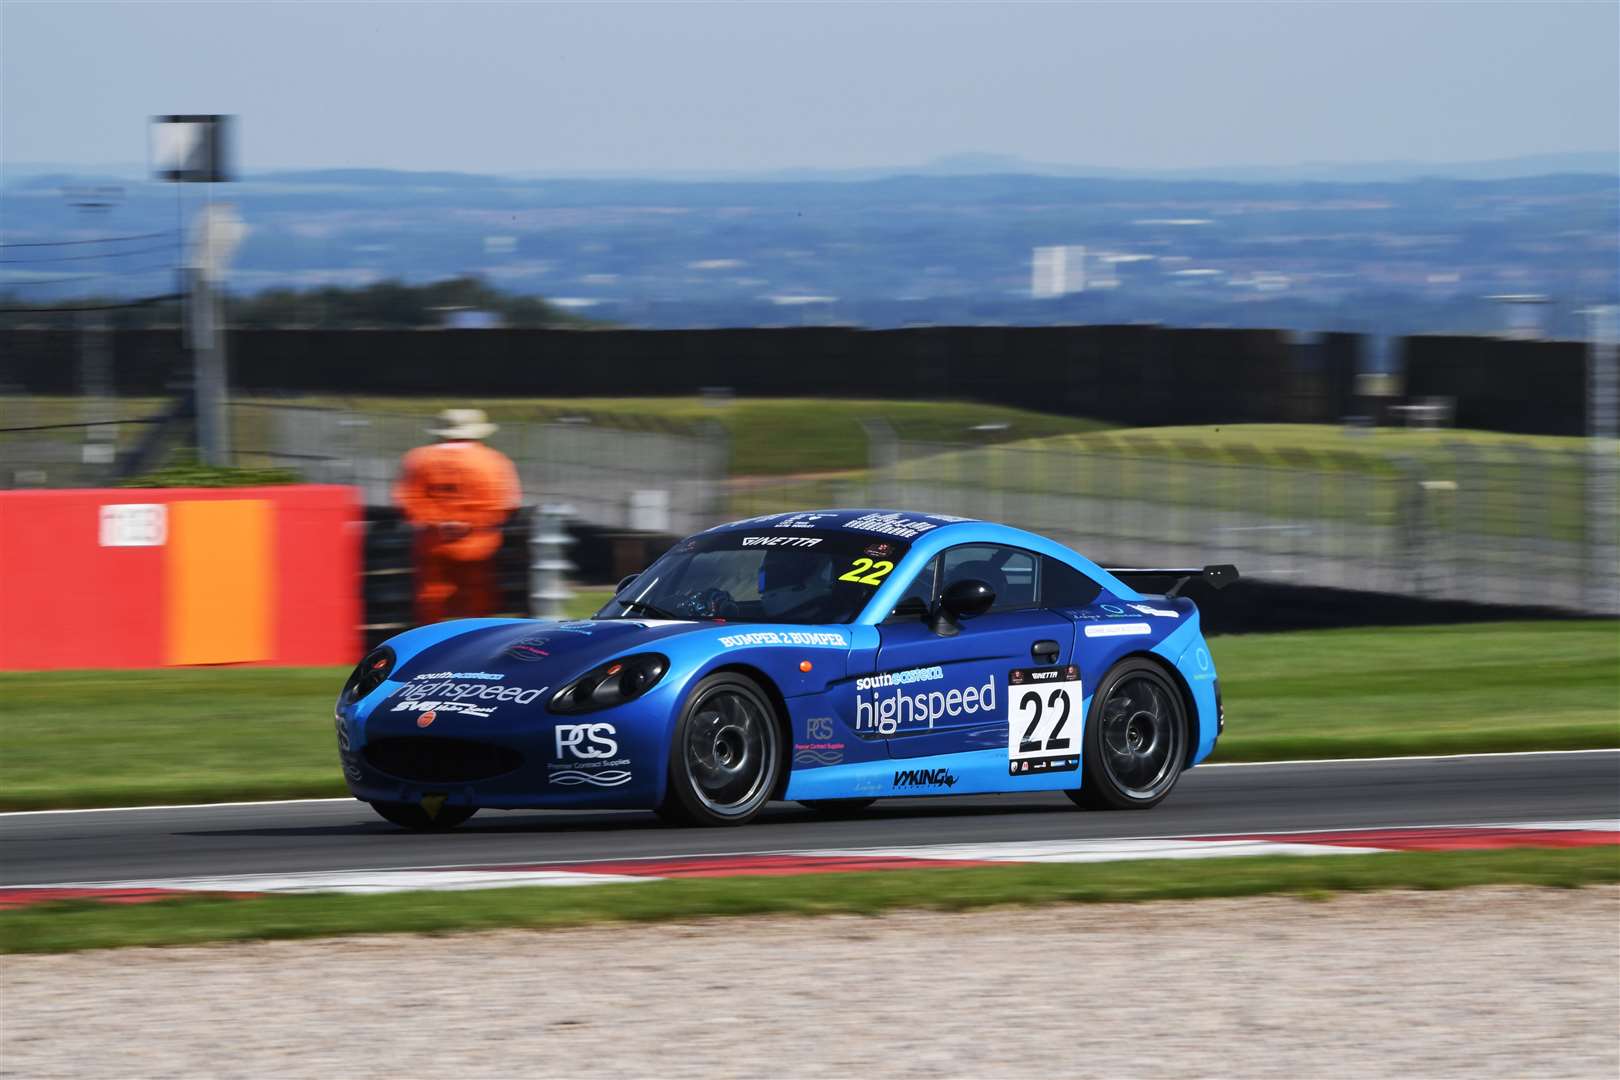 Toby Trice in action previously with Team HARD Racing in the Ginetta G40